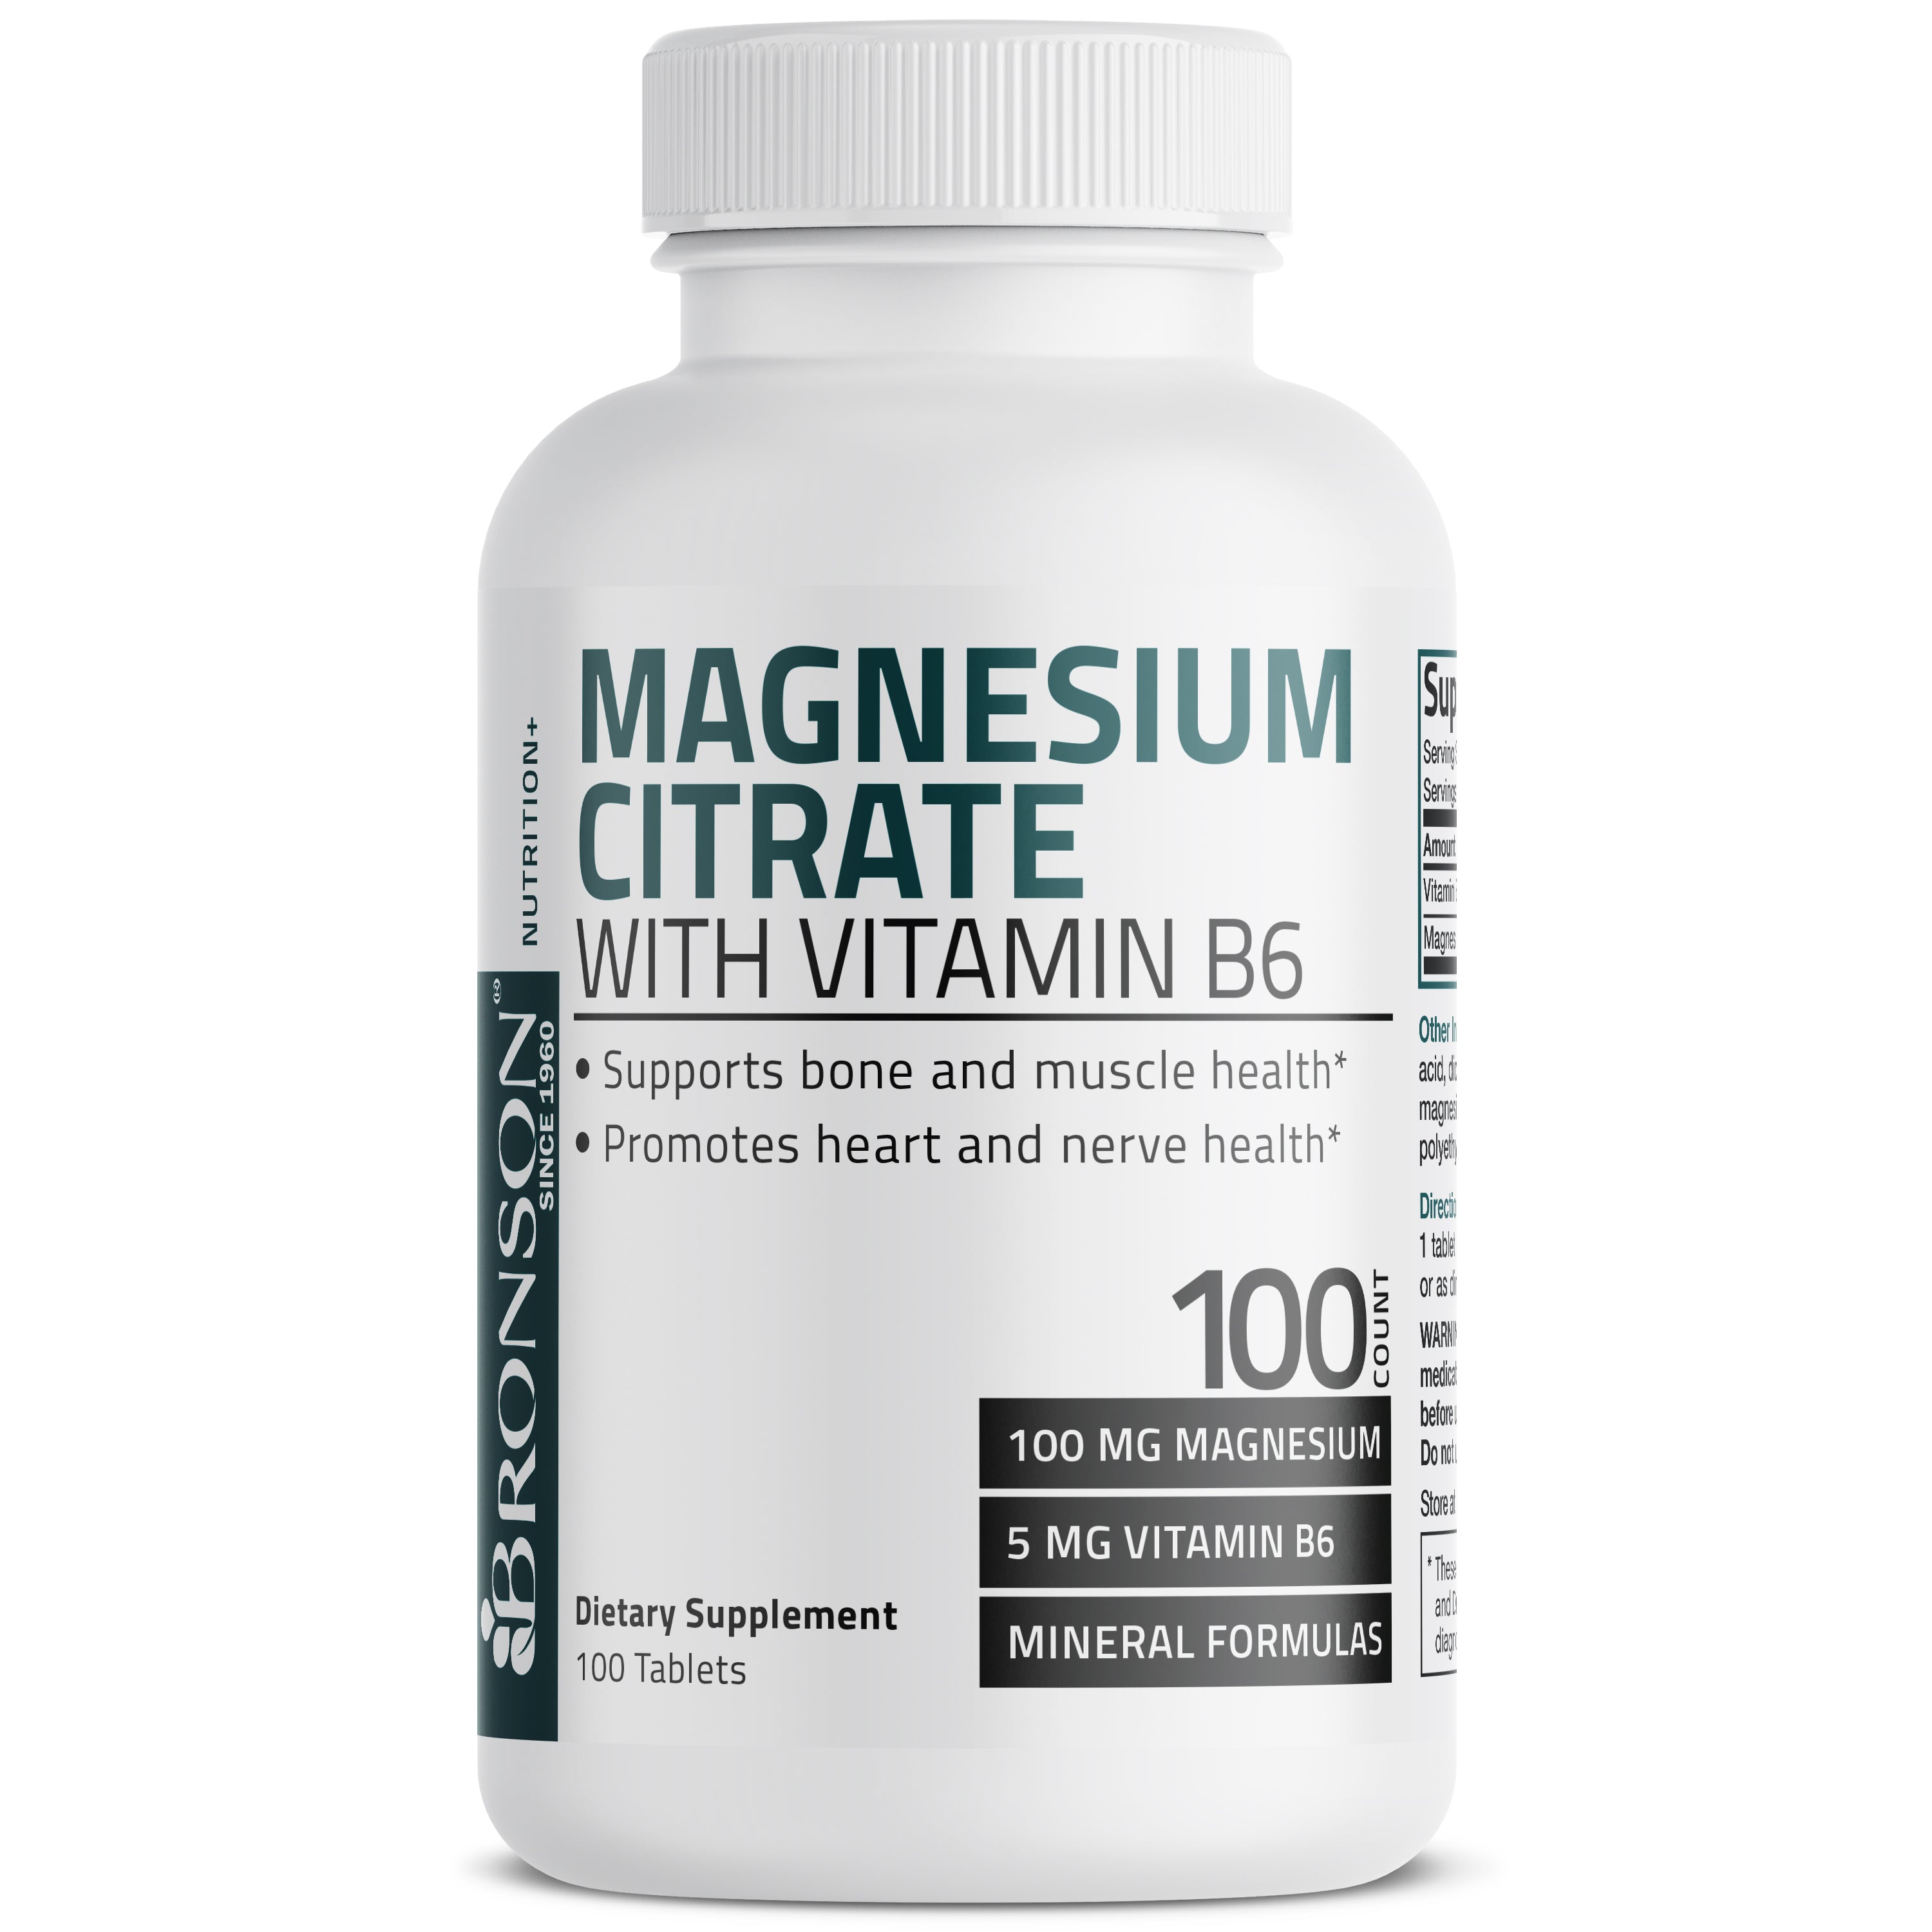 Magnesium Citrate with Vitamin B6 view 1 of 4